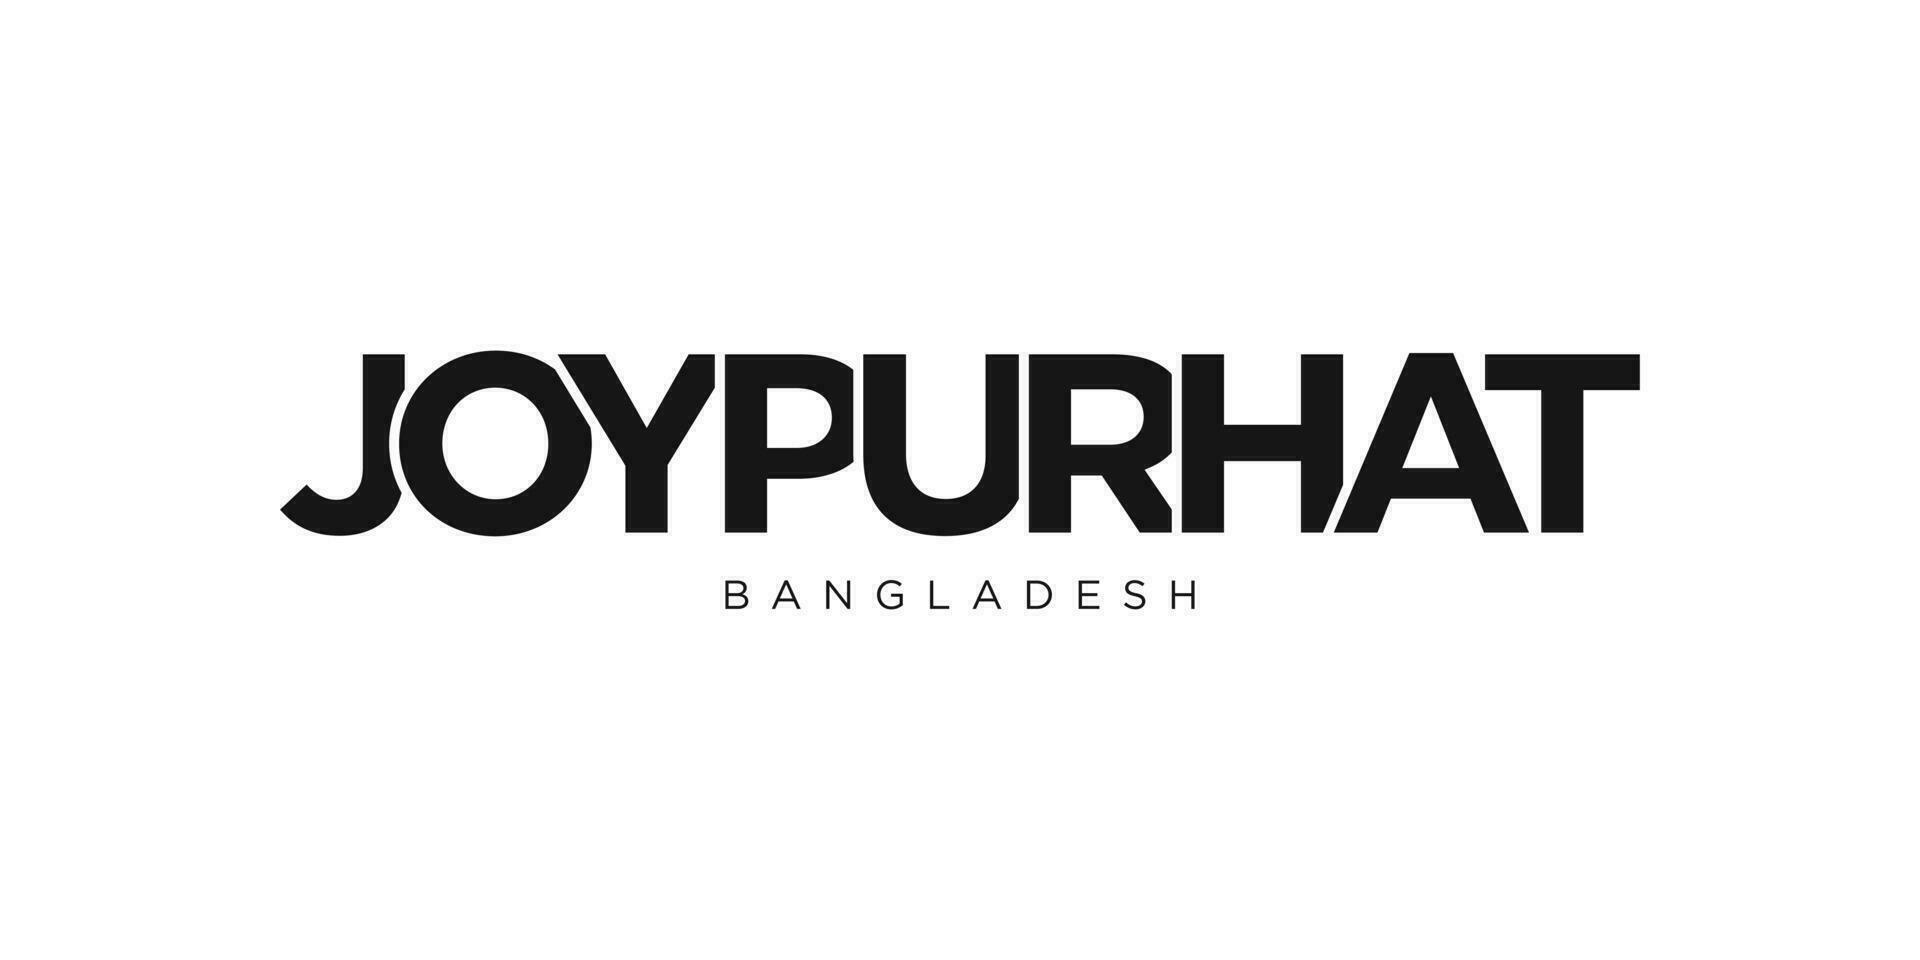 Joypurhat in the Bangladesh emblem. The design features a geometric style, vector illustration with bold typography in a modern font. The graphic slogan lettering.